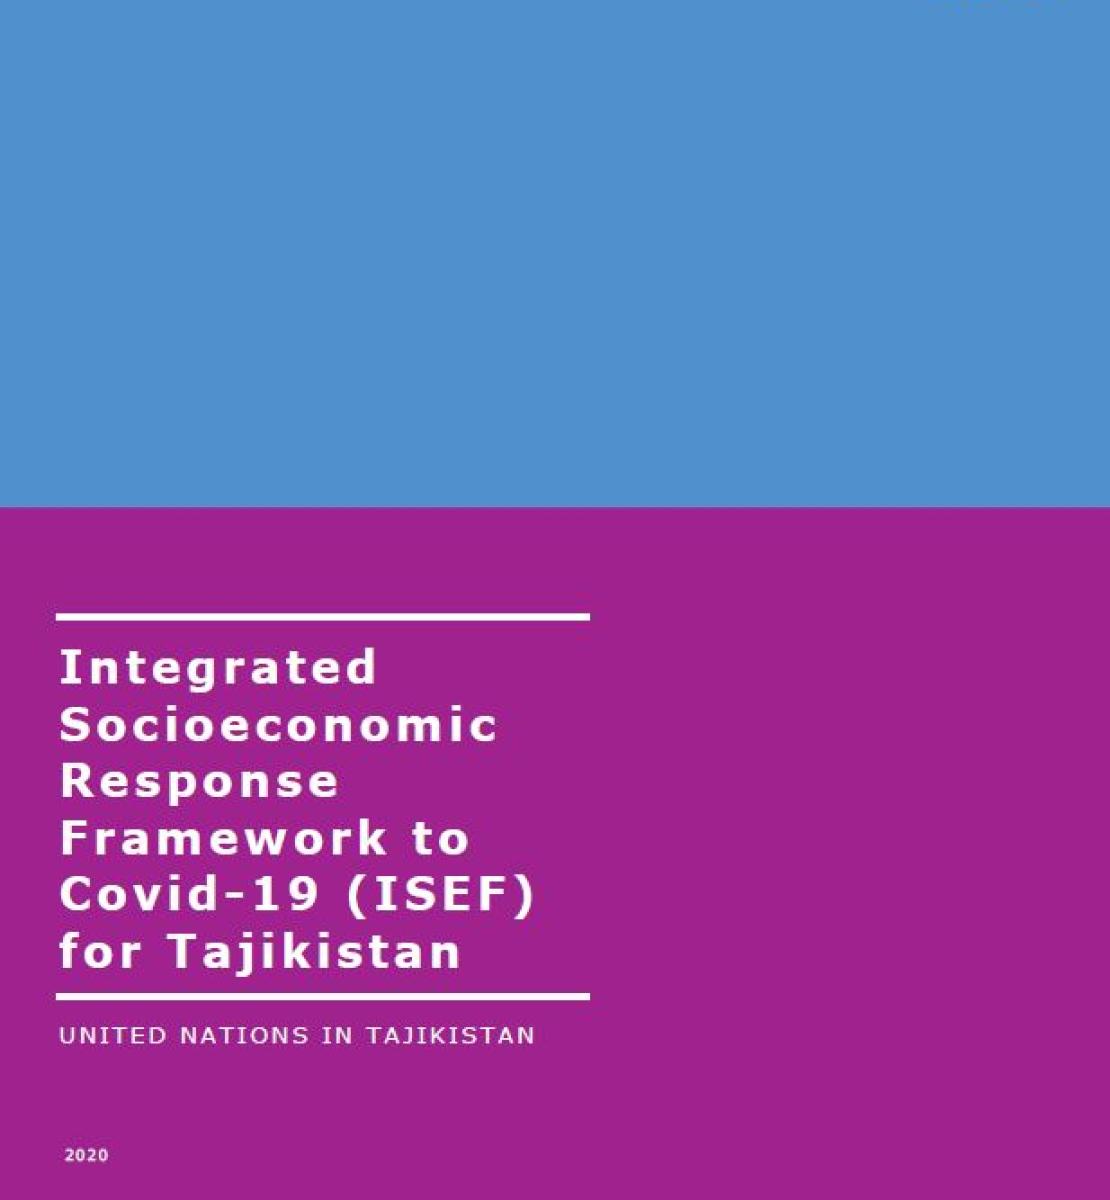 Cover shows the title "Integrated Socioeconomic Response Framework to Covid-19 for Tajikistan", over blue and purple background 